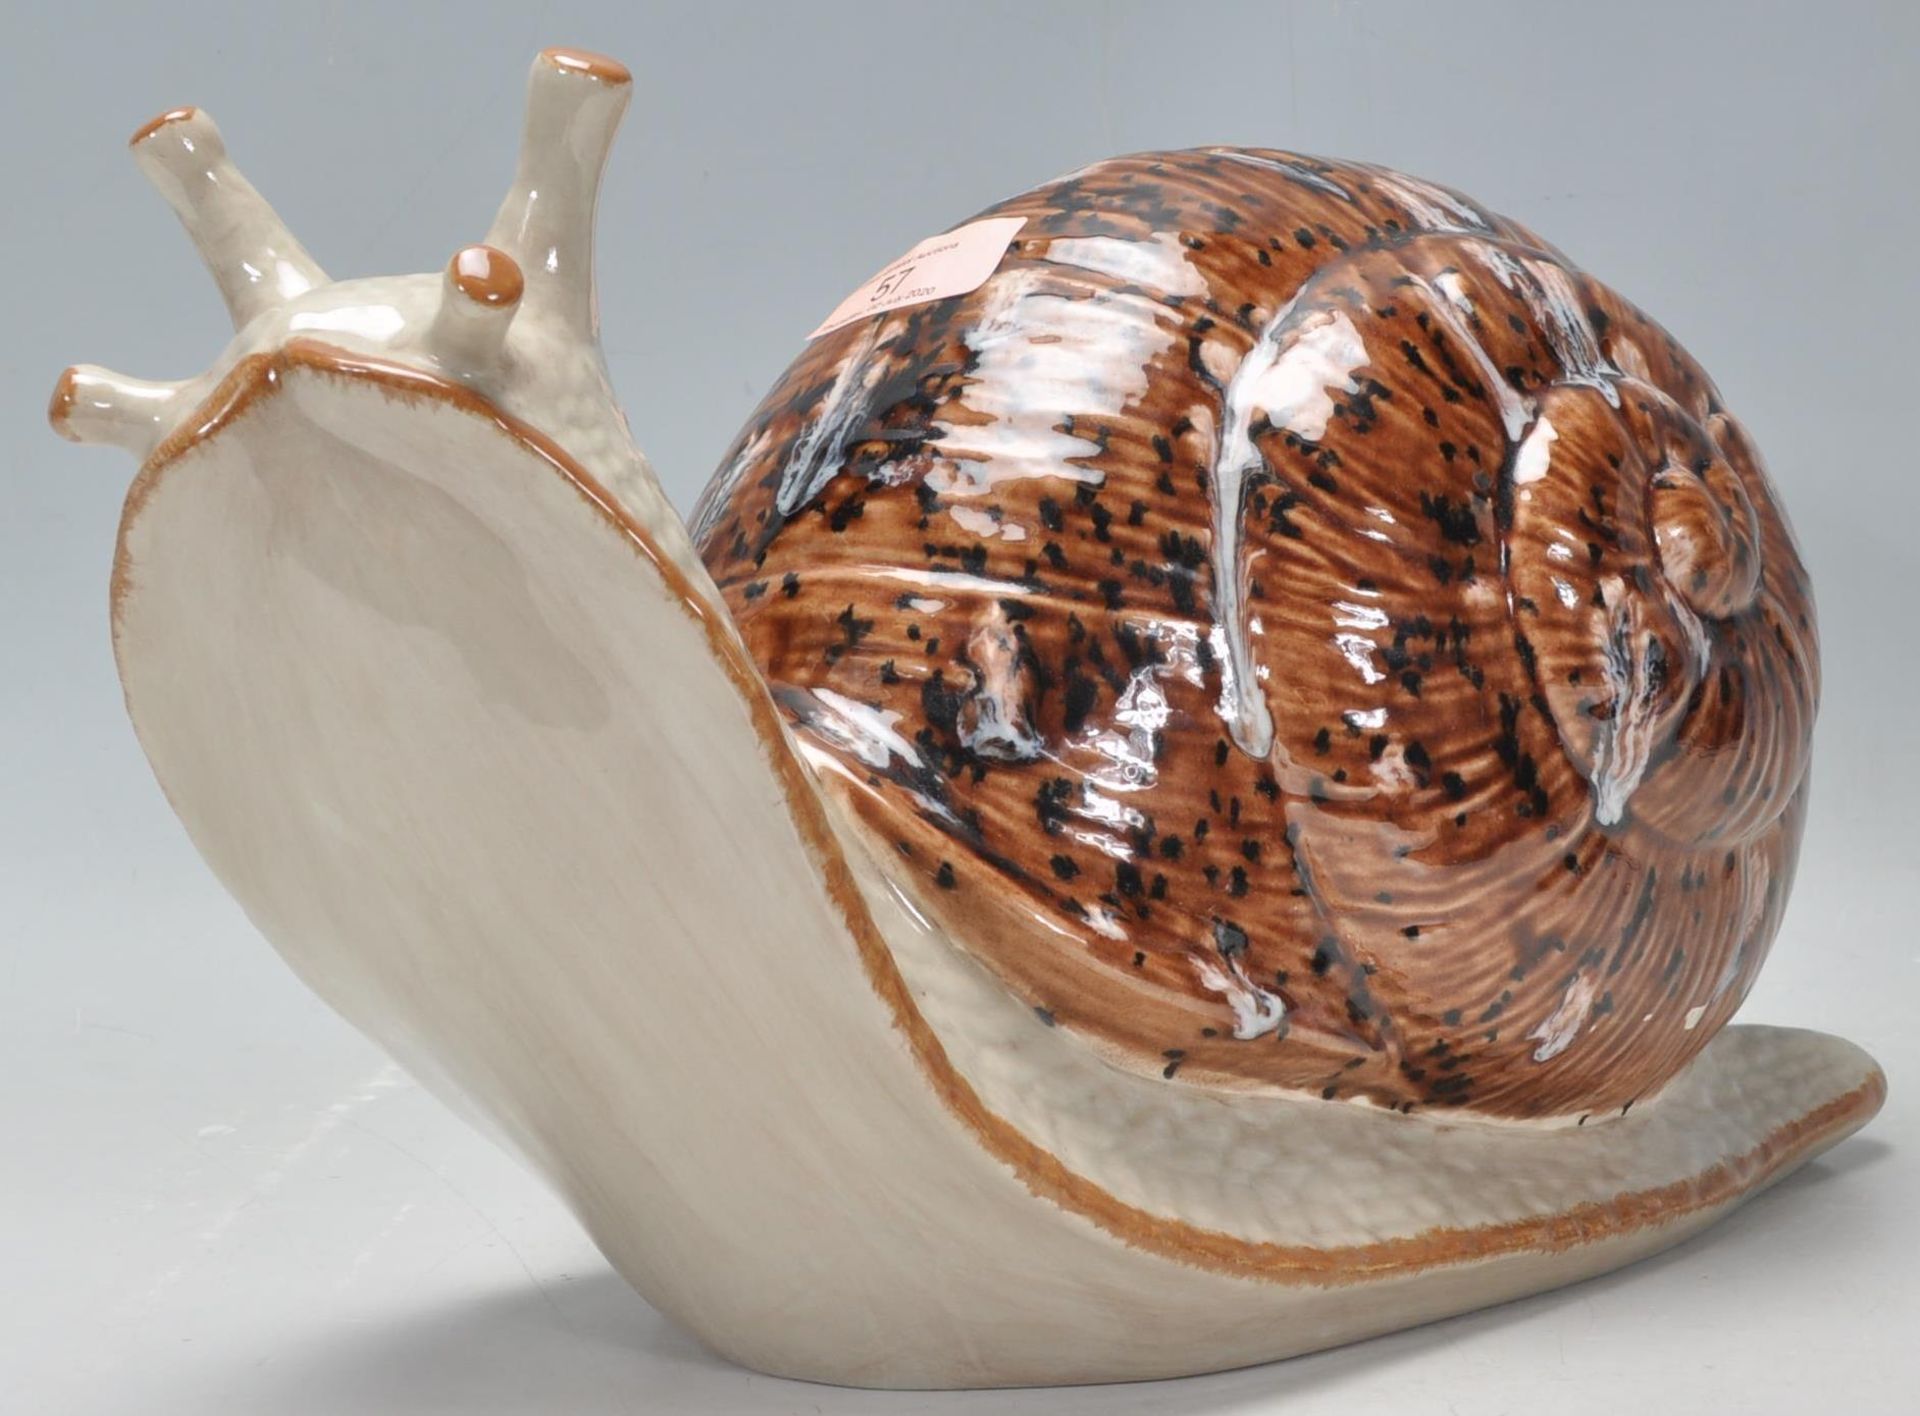 A vintage late 20th Century studio art pottery figurine in the form of a snail having a mottled